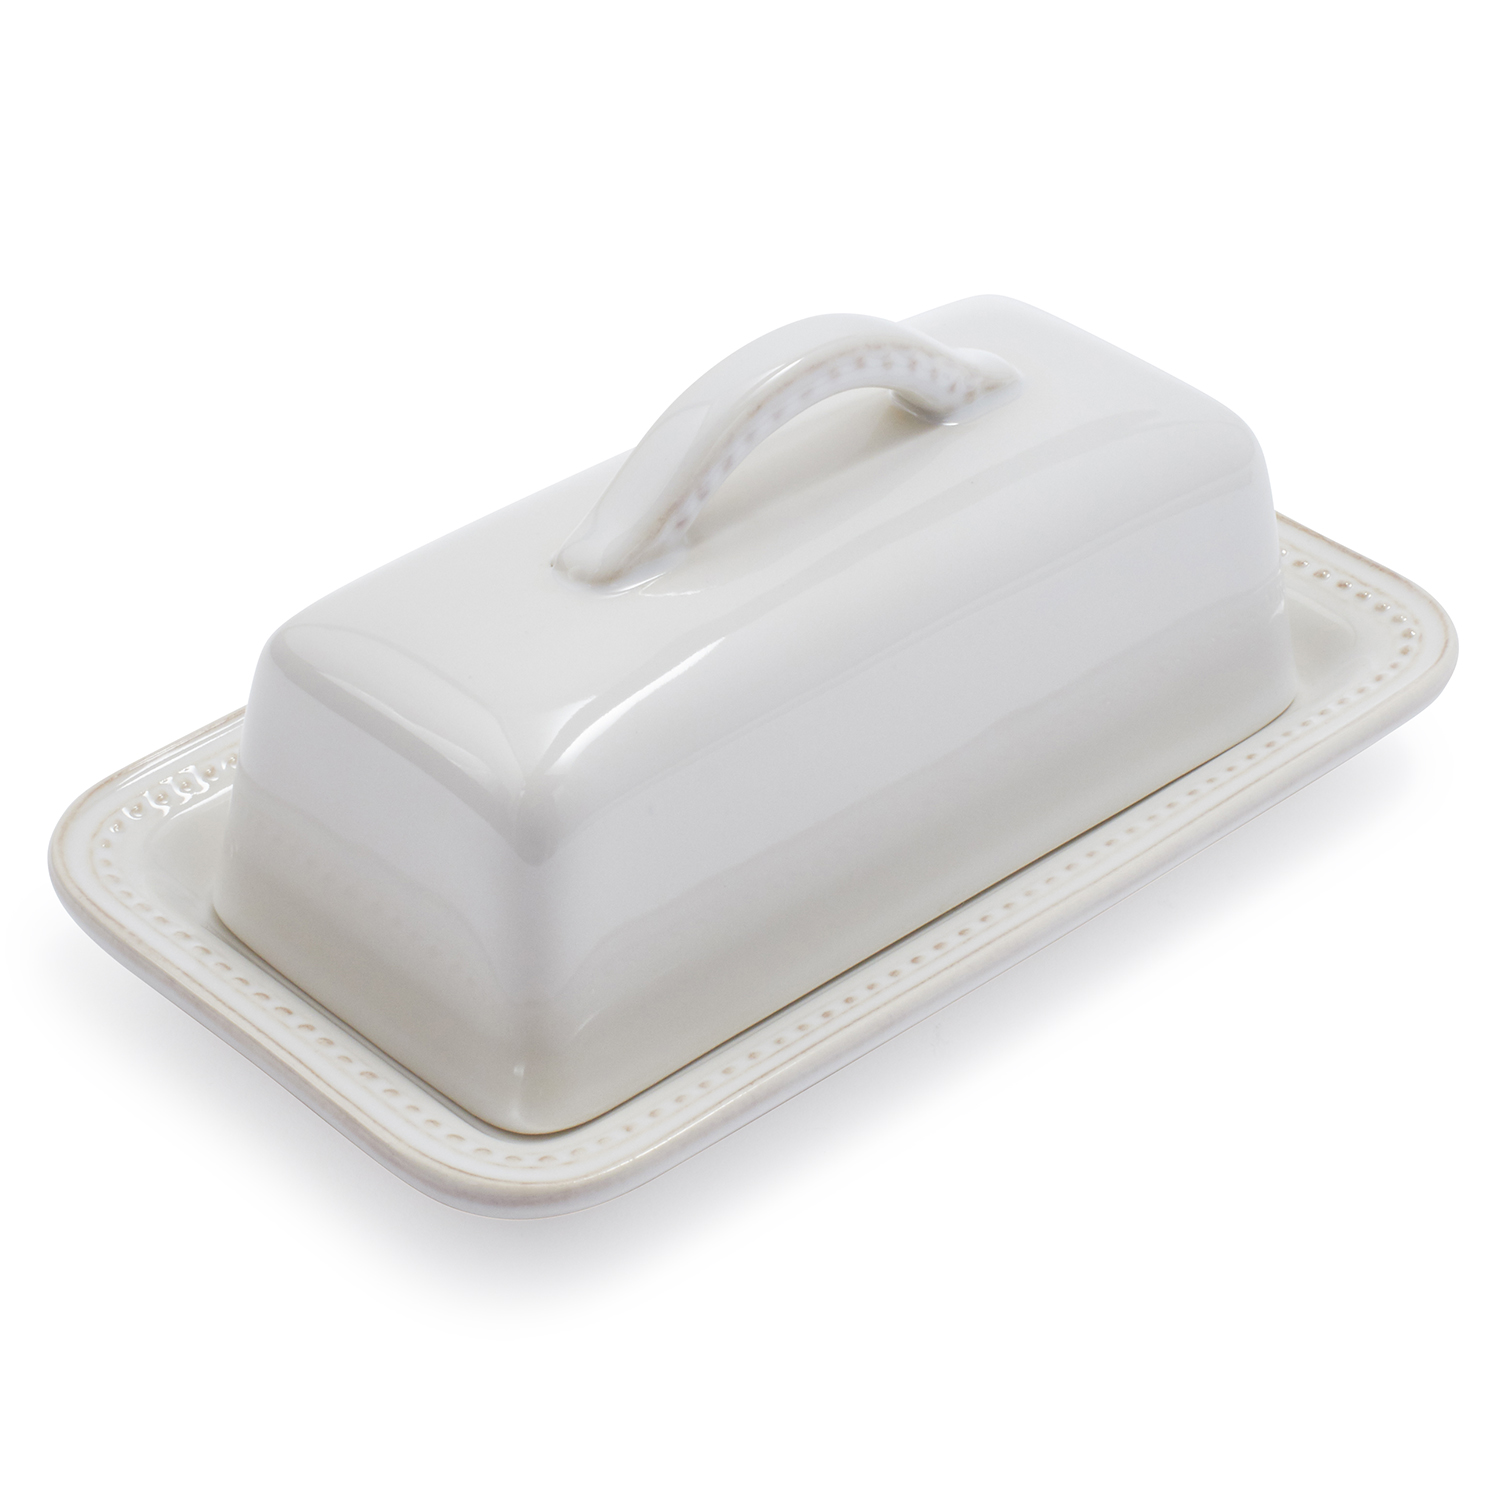 butter dish with lid amazon